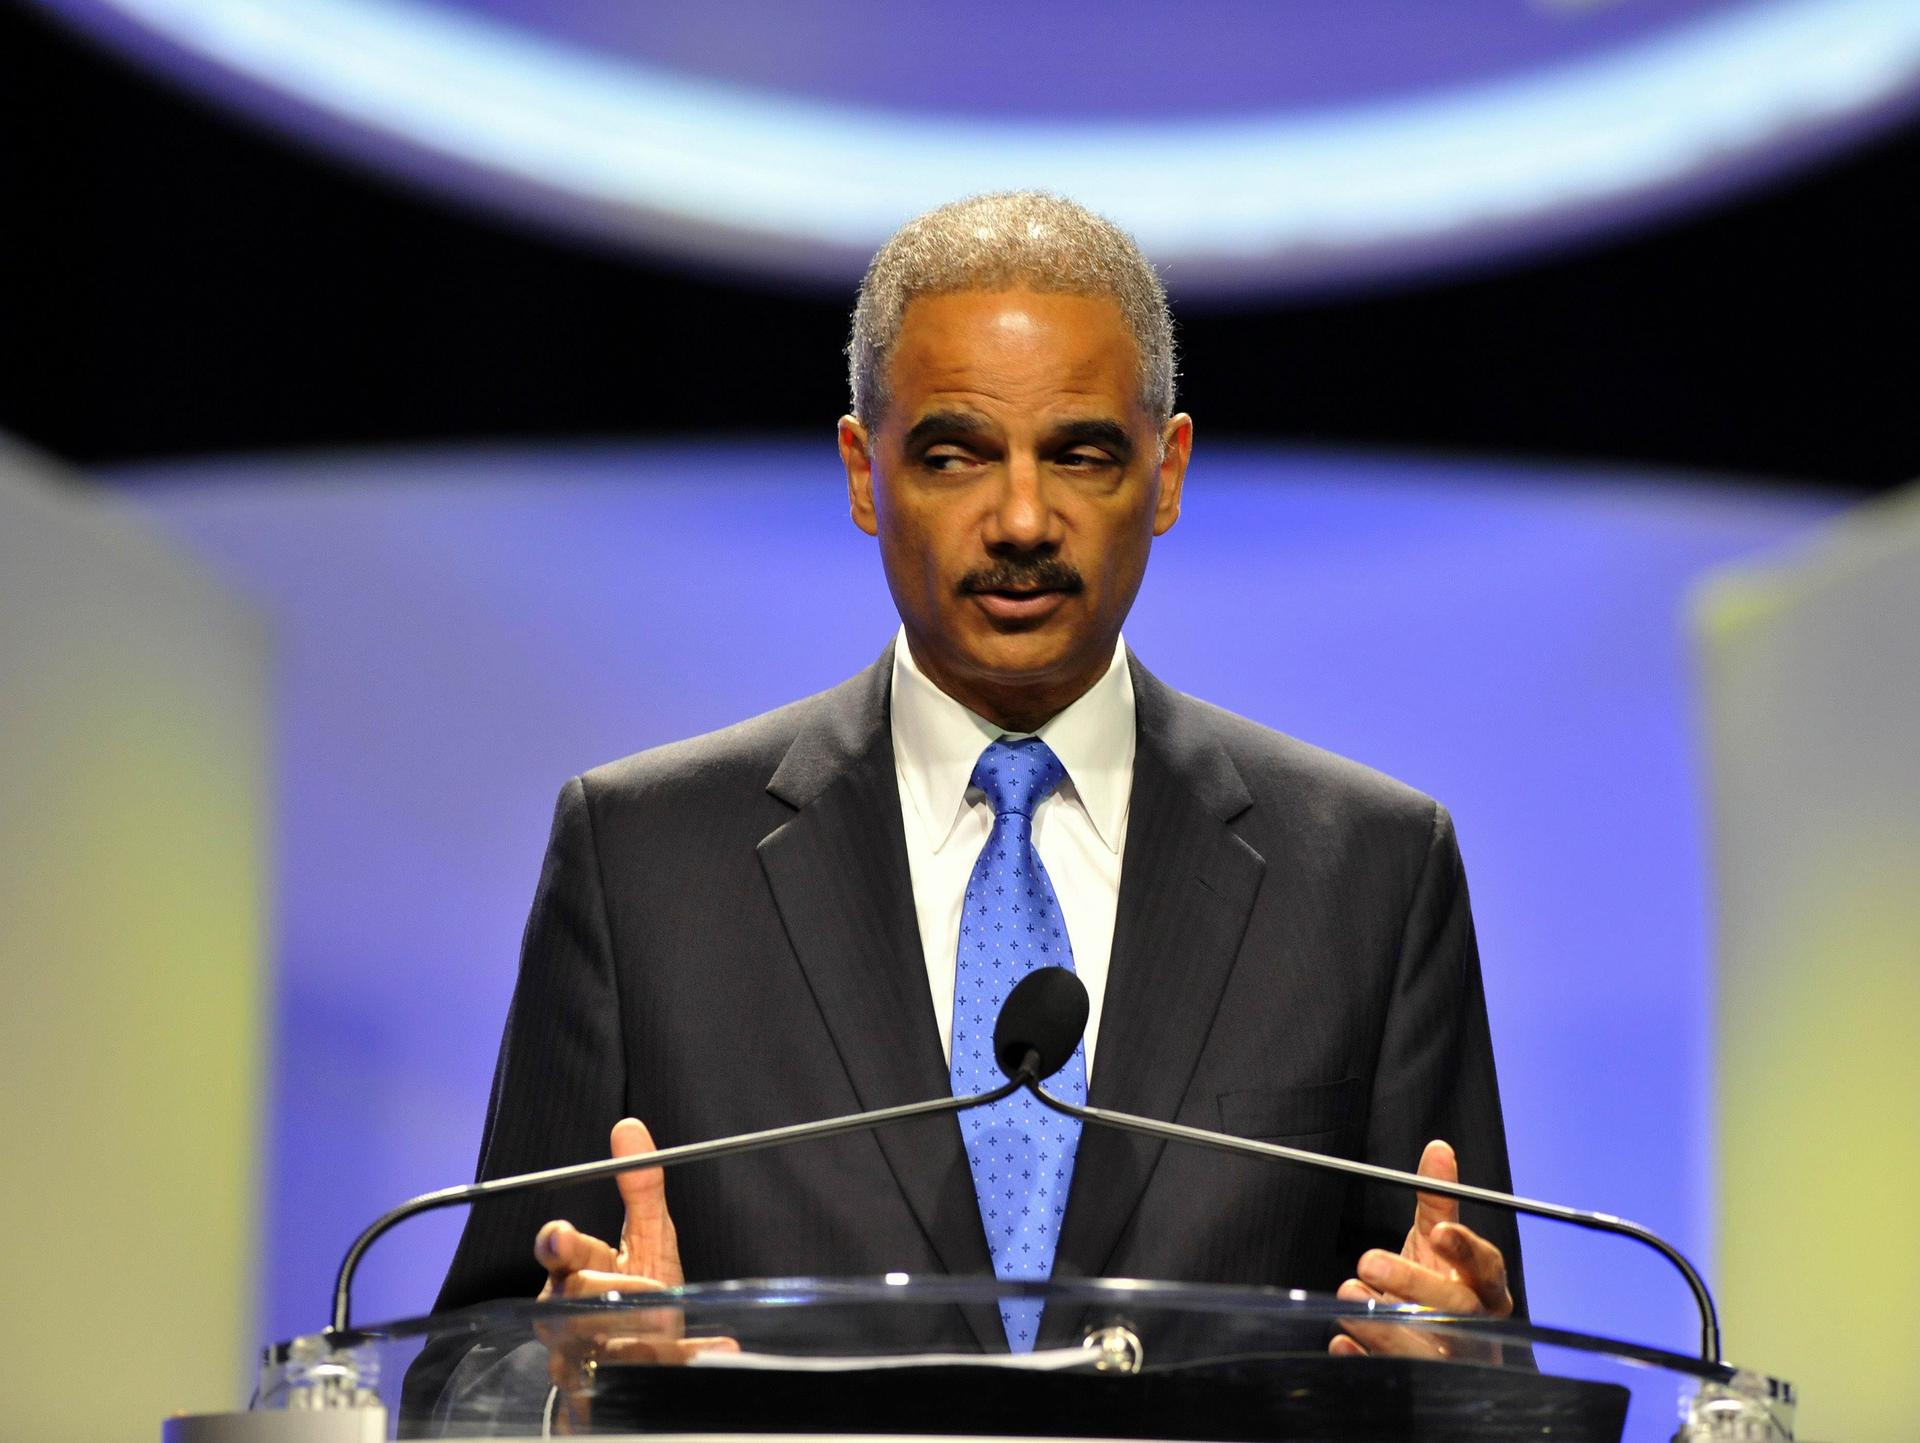 Attorney General Eric Holder, says laws must reduce violence